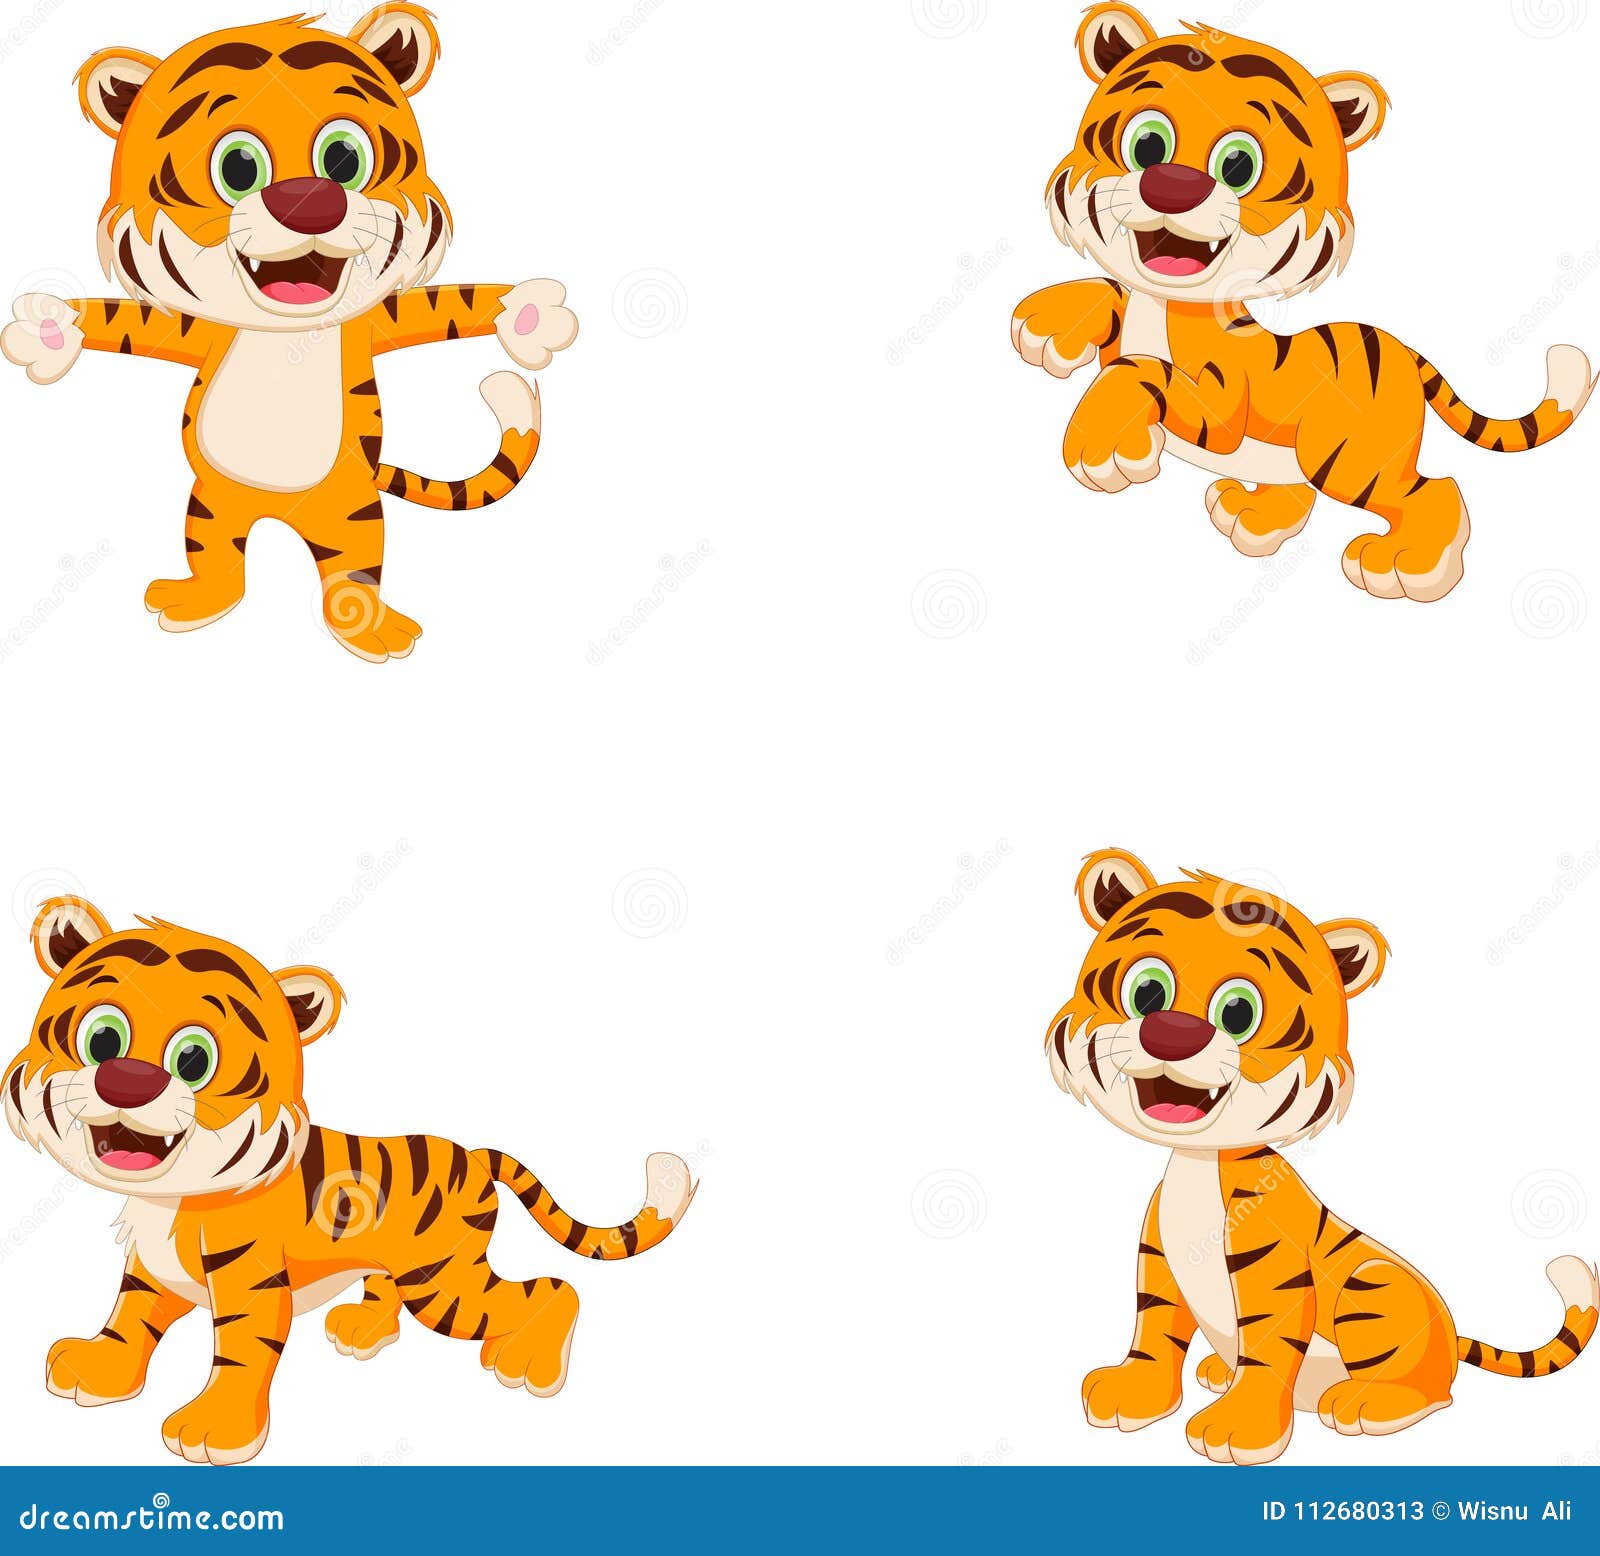 Collection of Cute Tiger Cartoon Stock Vector - Illustration of ...